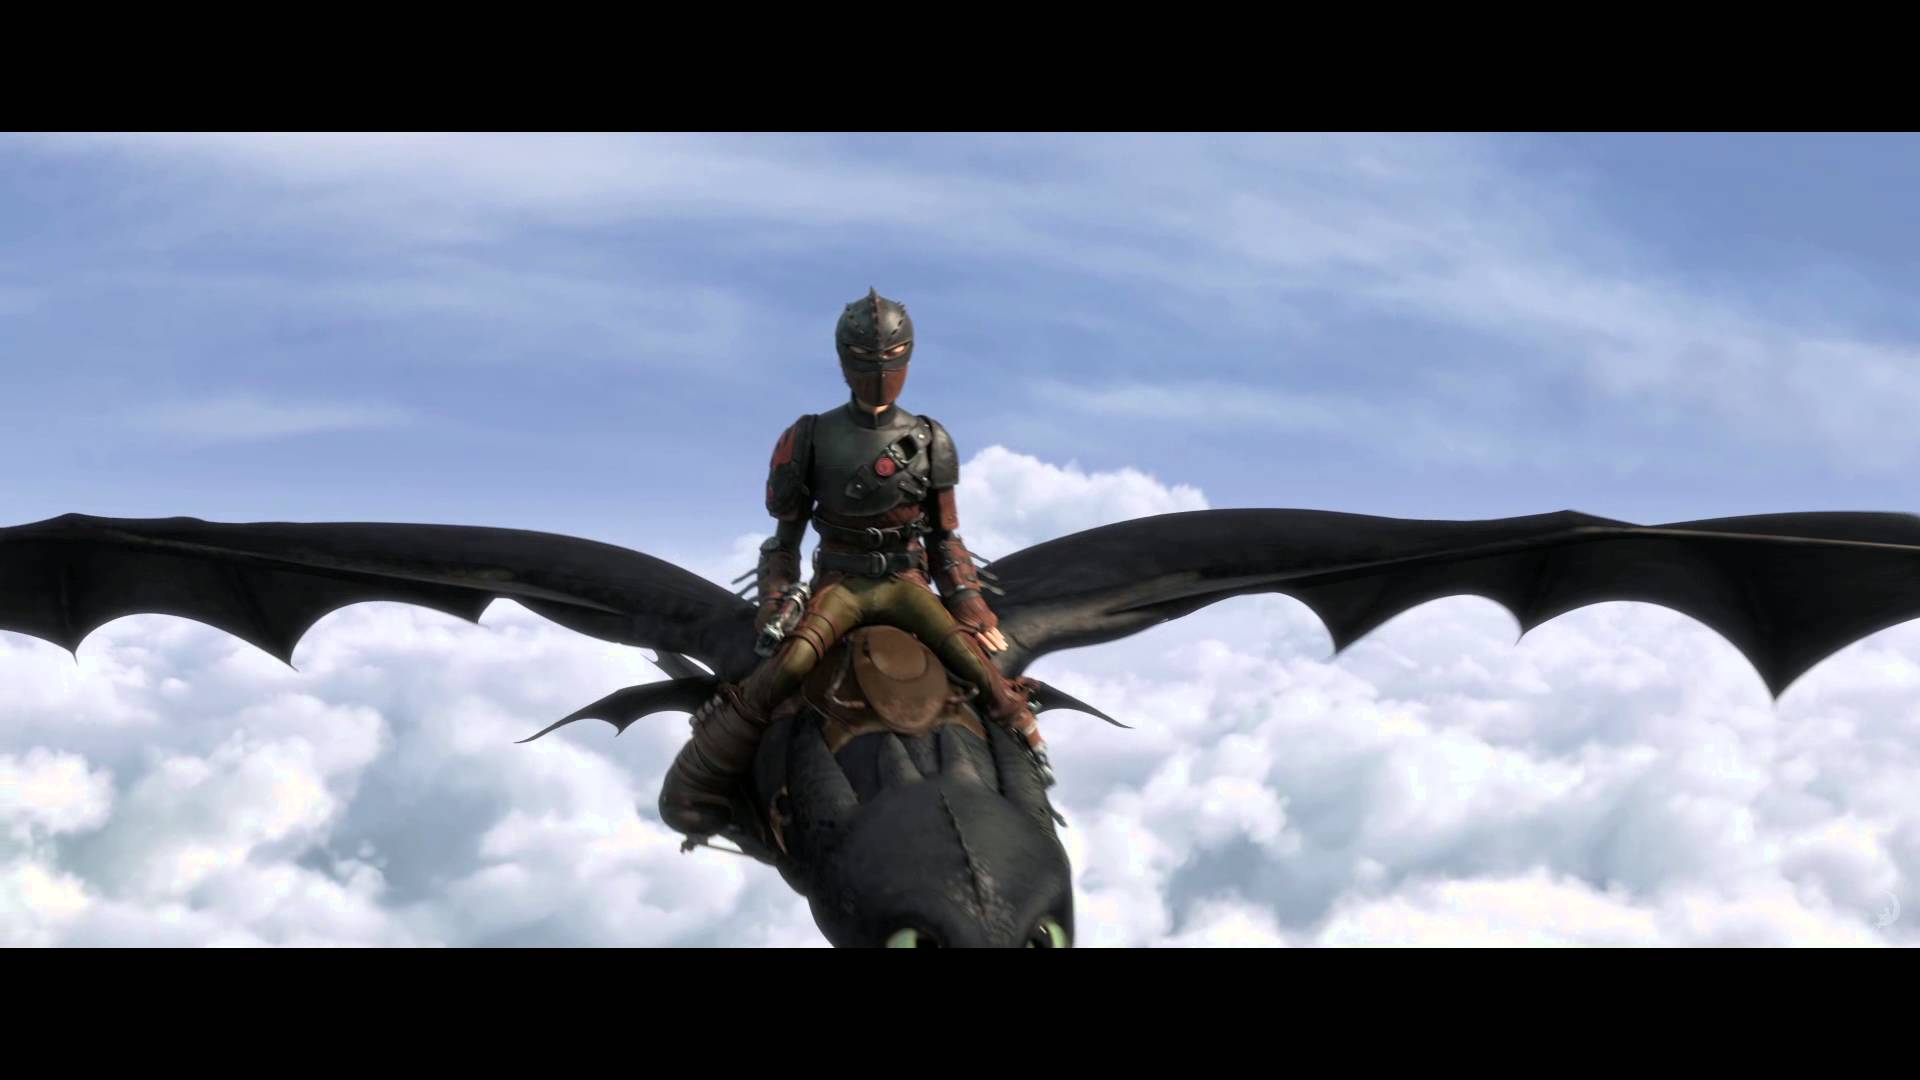 HOW TO TRAIN YOUR DRAGON 2 Teaser Trailer